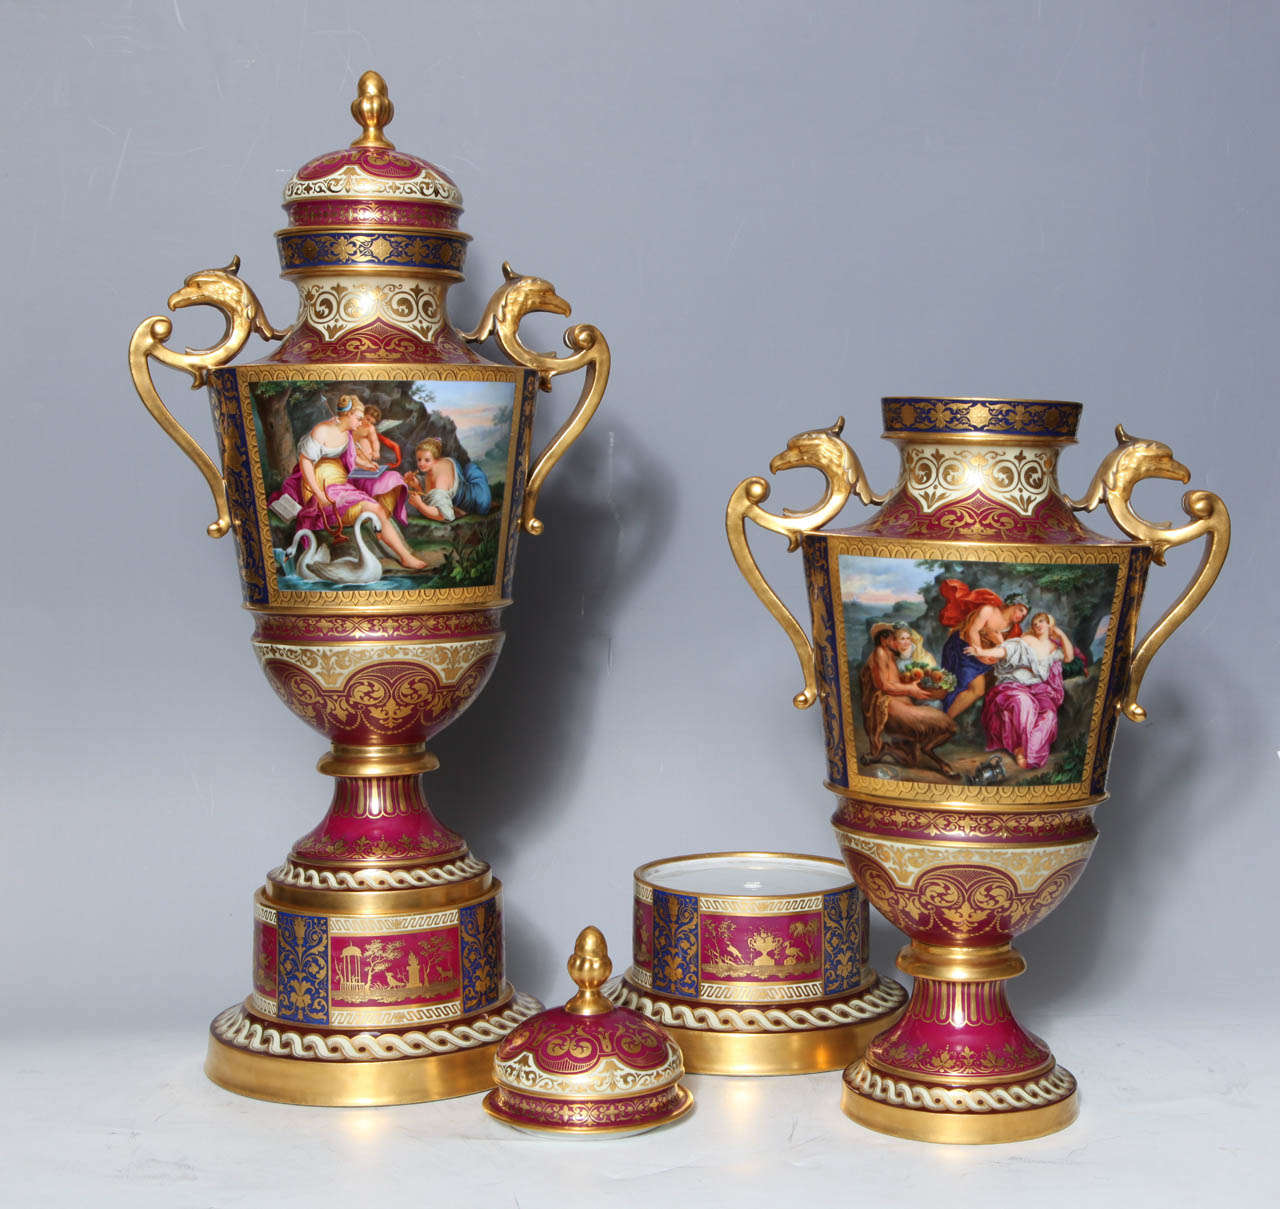 19th Century Magnificent Pair Royal Vienna Porcelain Covered Urns on Stands with Eagles For Sale